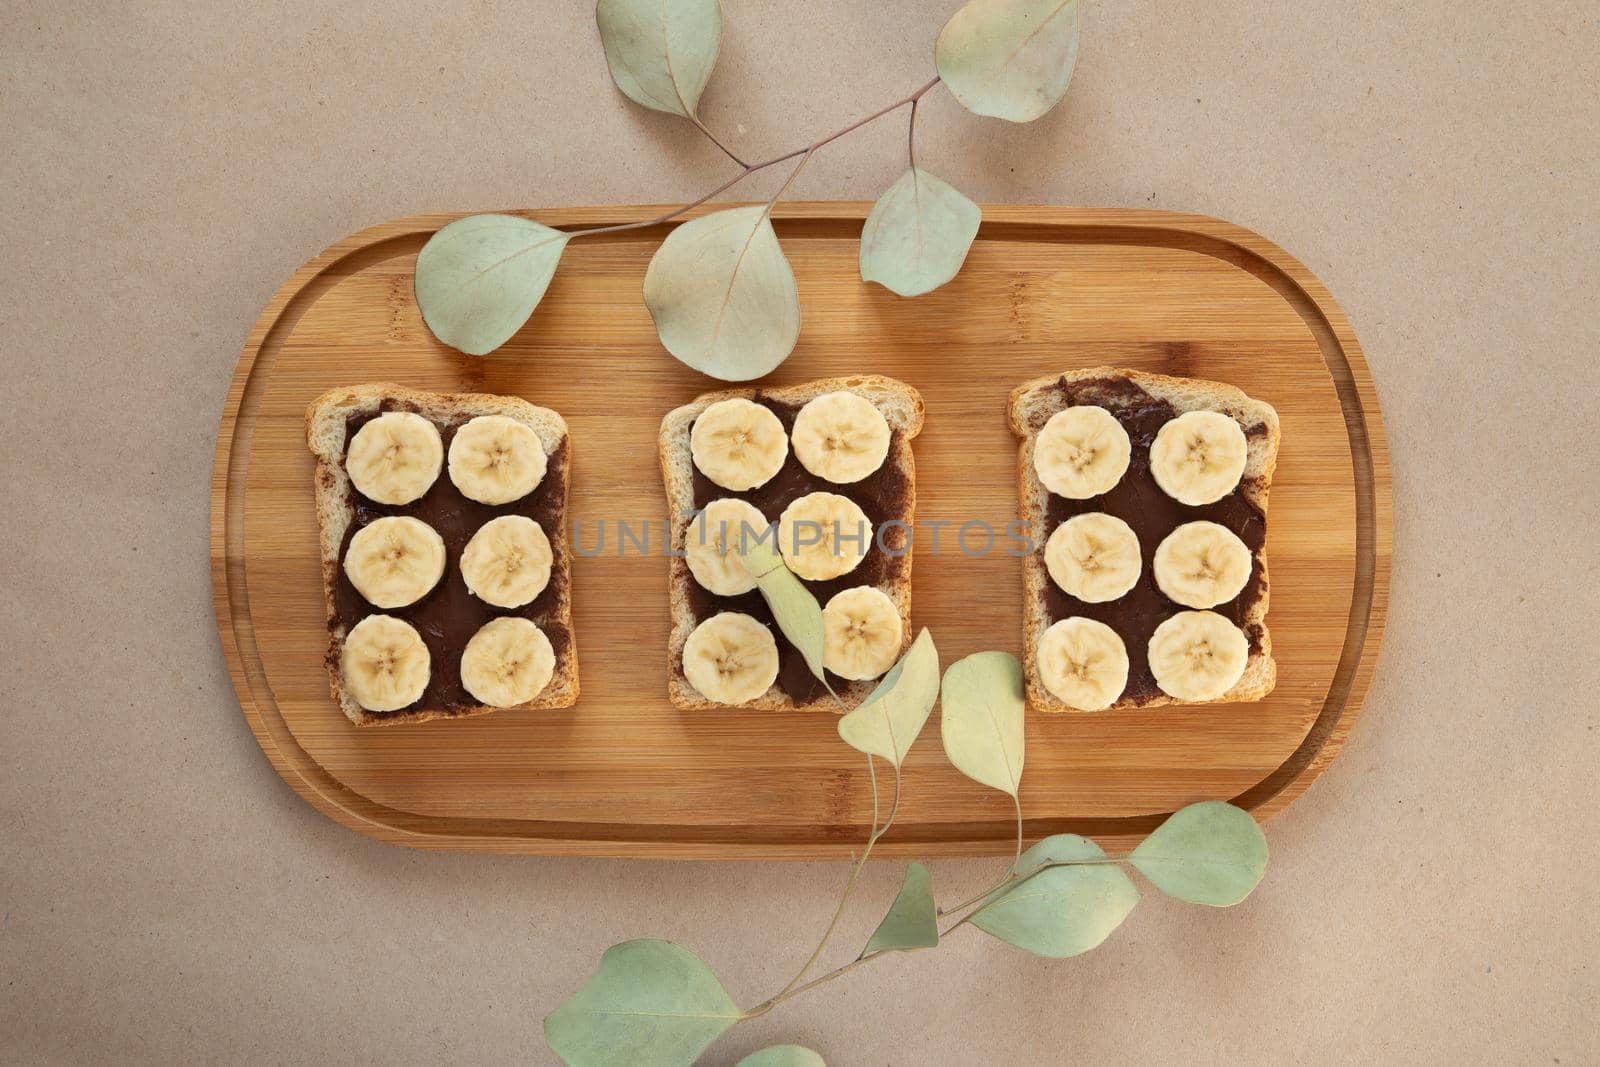 Three banana white bread toasts smeared with chocolate butter that lie on a cutting board with a sprig of leaves on craft paper background. top view with area for text by lunarts